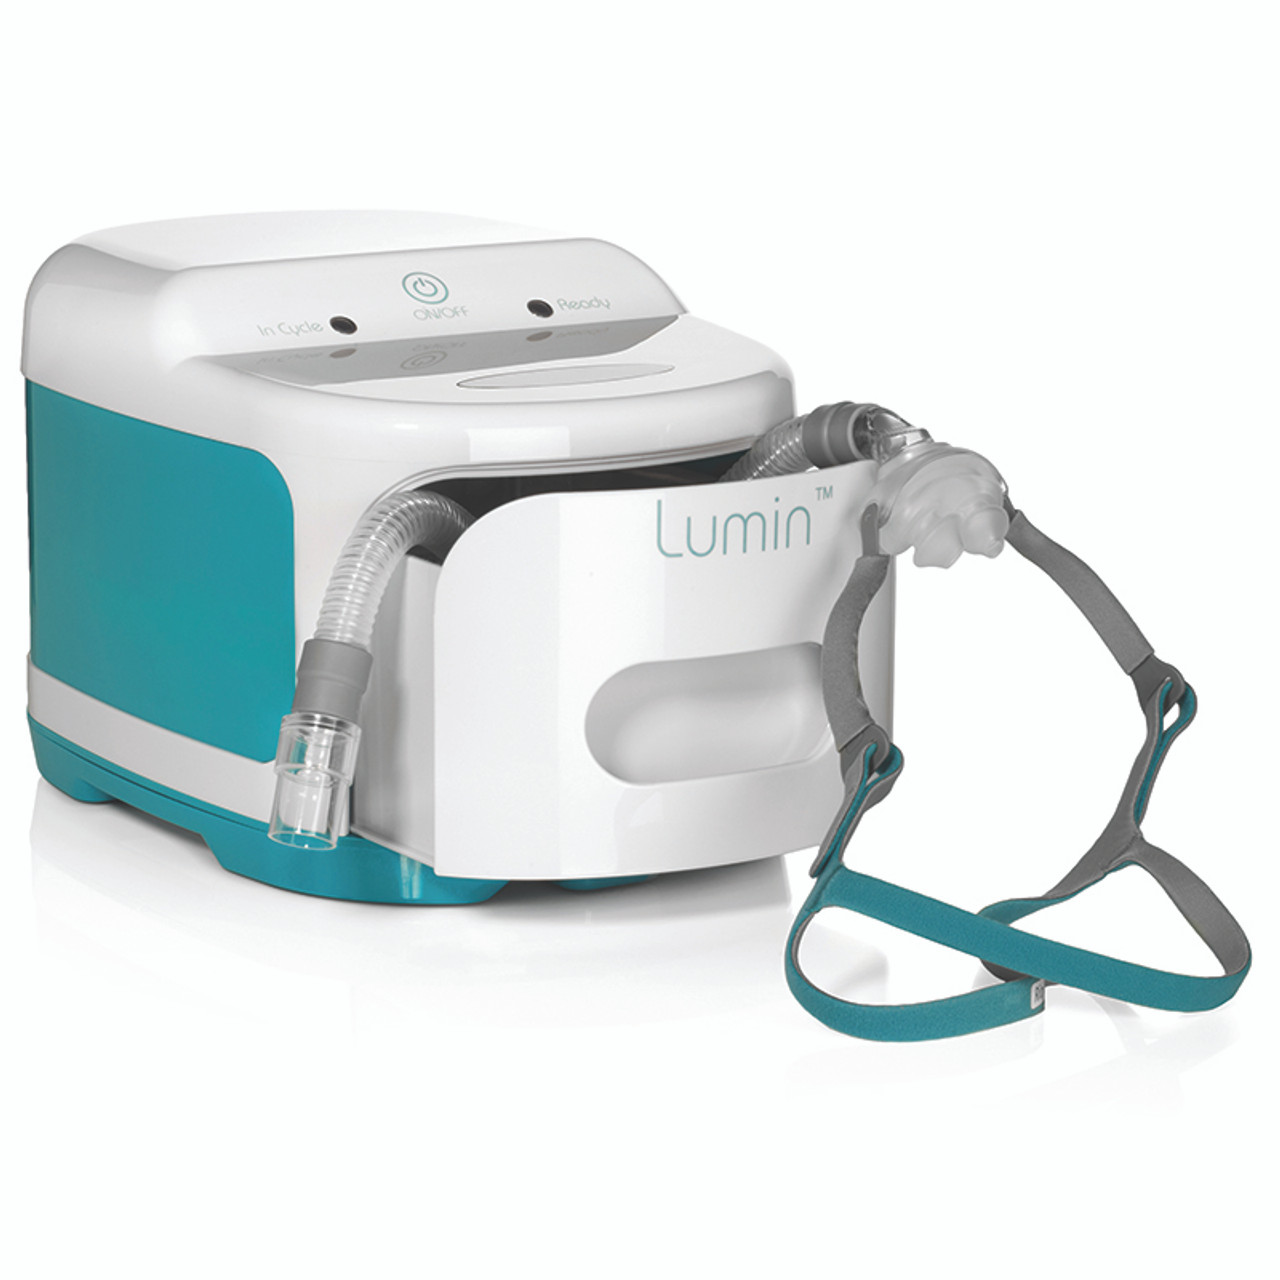 Lumin CPAP Sanitizing Device - with mask